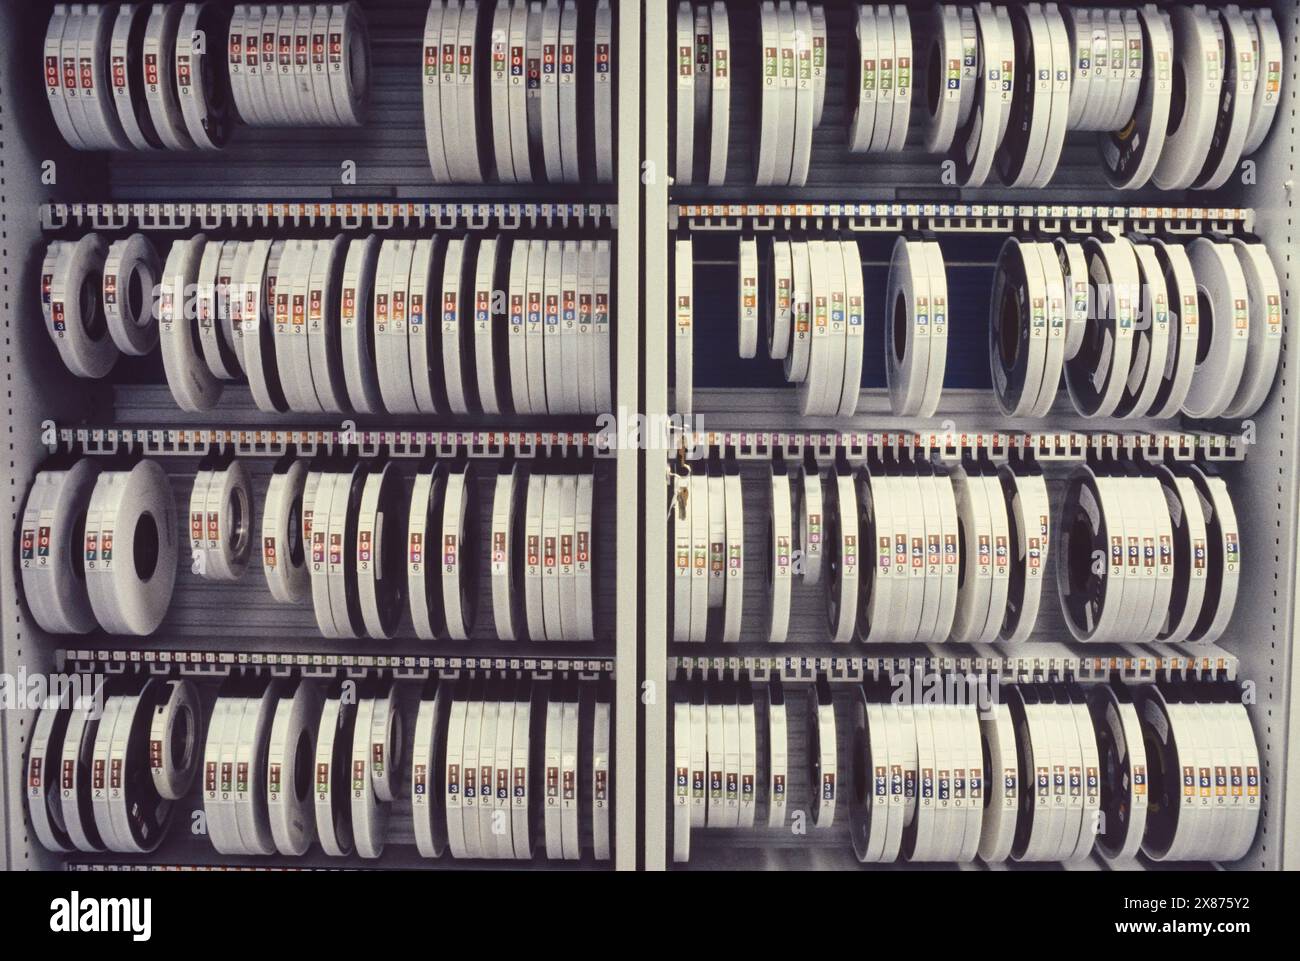 Main frame computer tapes 1981. Stock Photo